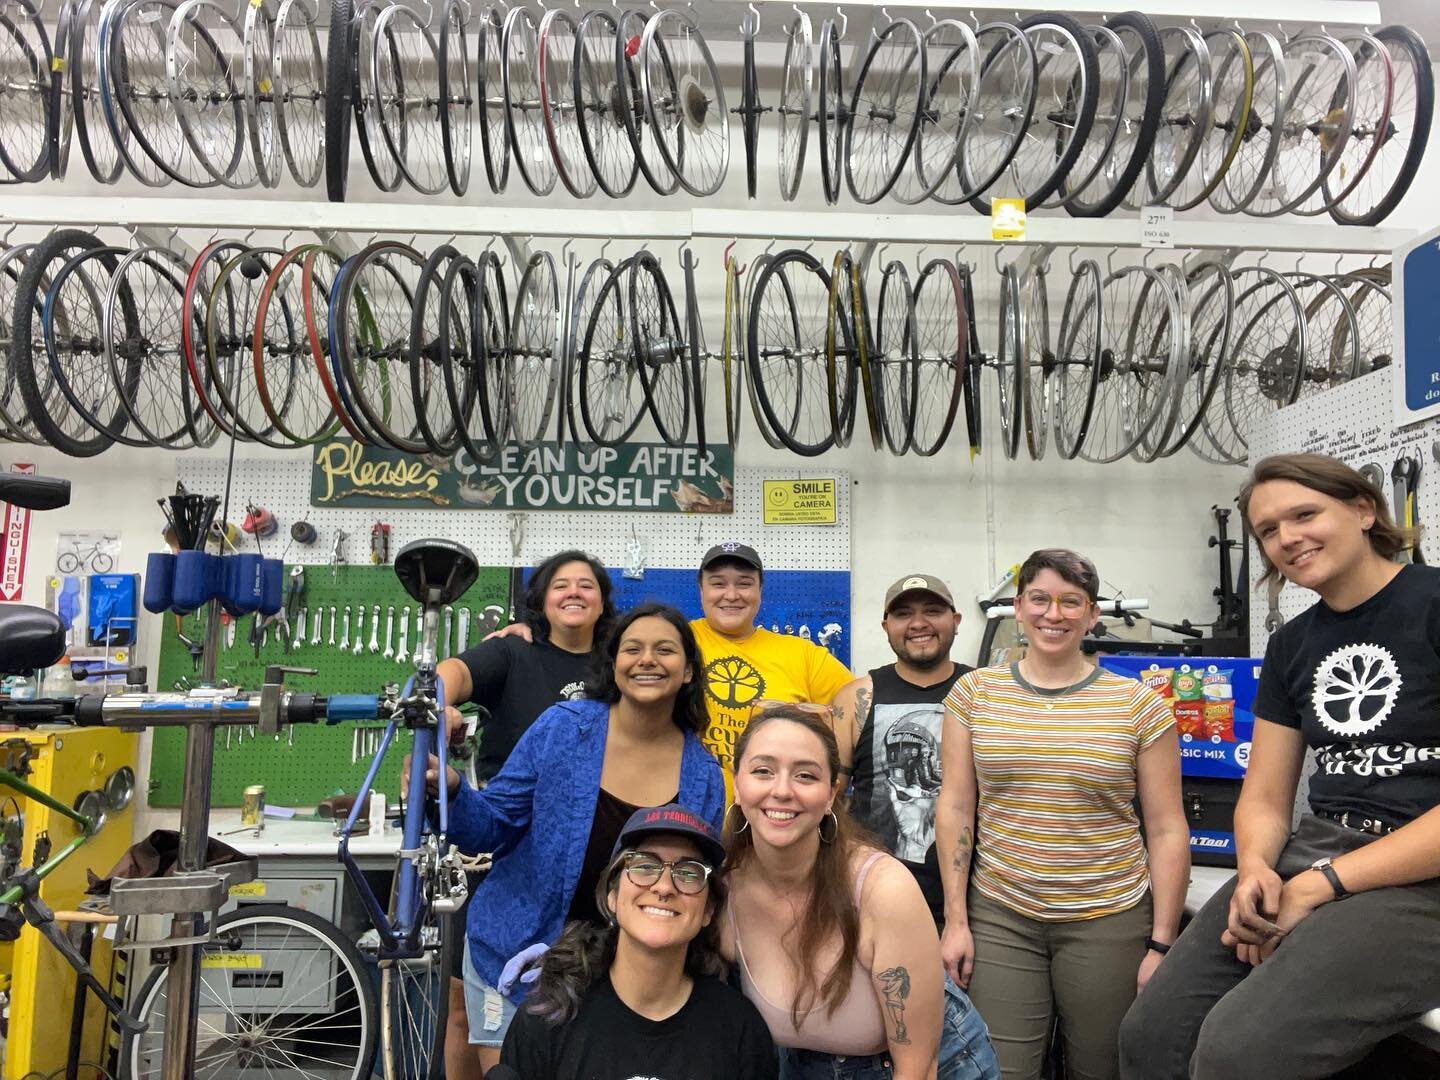 Catch us every third Tuesday of the month for our monthly wrenching hours! 

Bring your bike to work on or learn from another persons bike!

We have two classes coming up for the remainder of the month! 
Aug 22: Basics of Drivetrain
Aug 29: Basic Bik